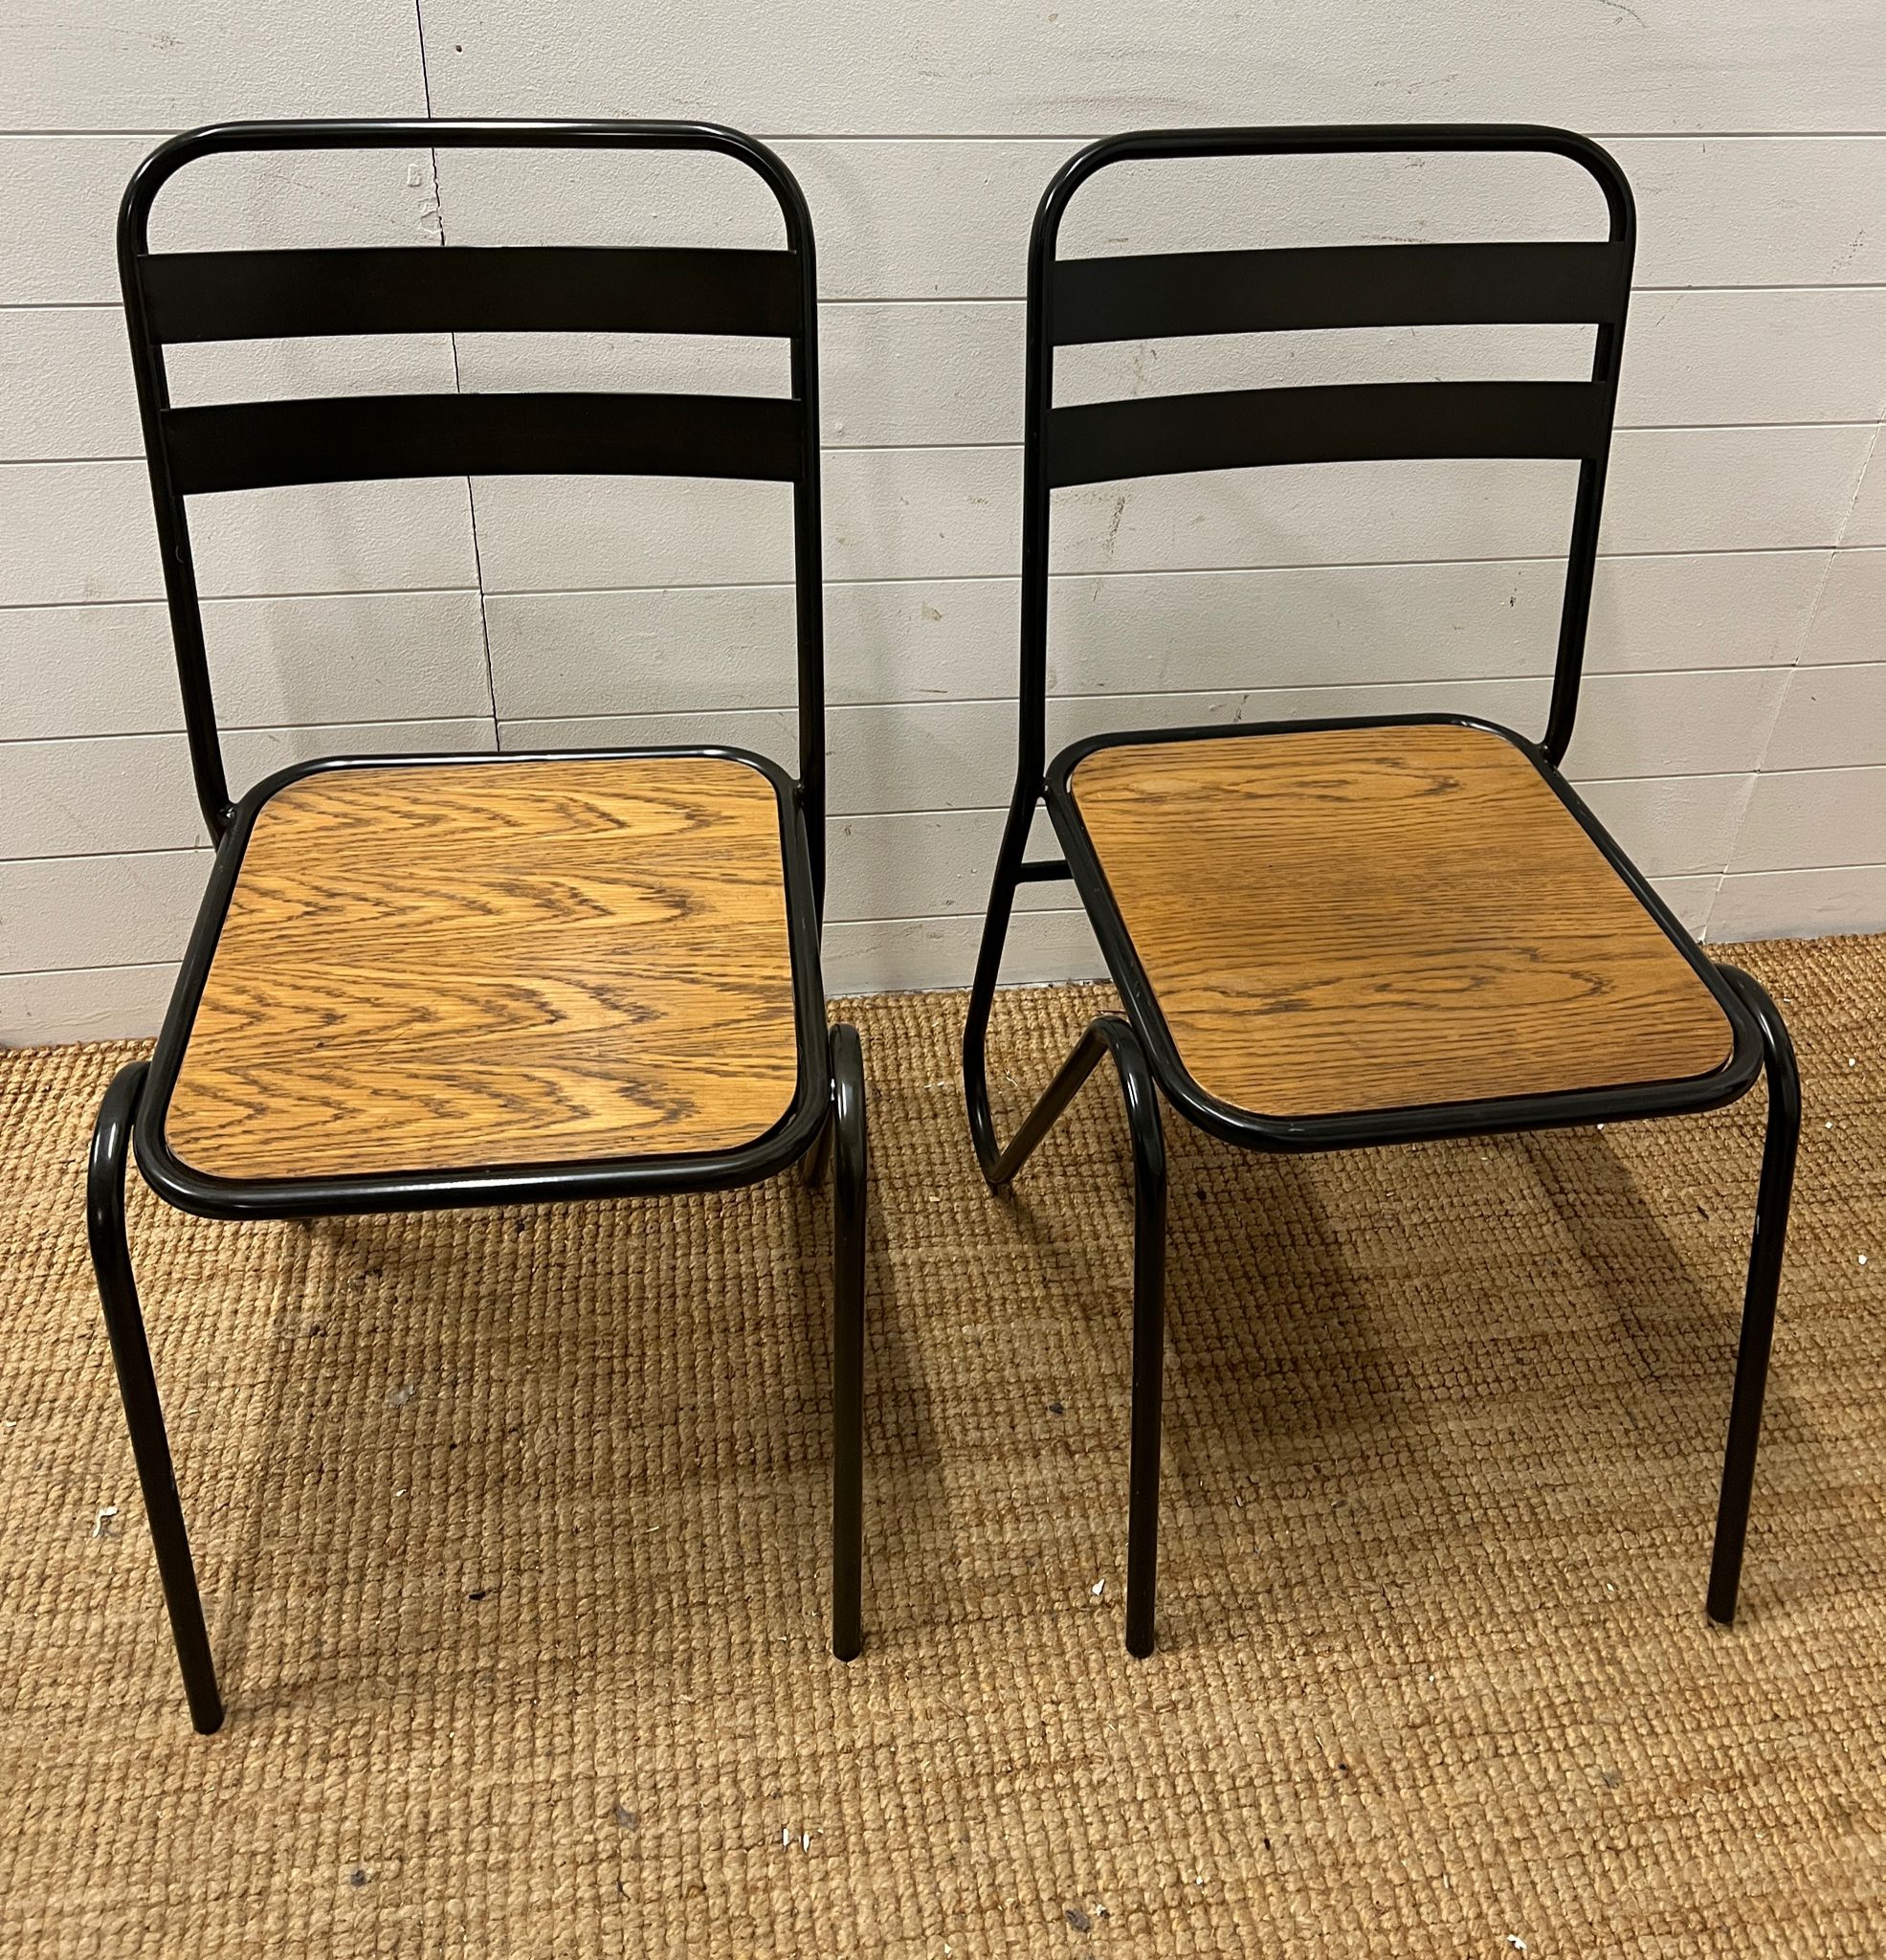 A pair of contemporary industrial style sacking chairs with wooden seat and metal hair pin style